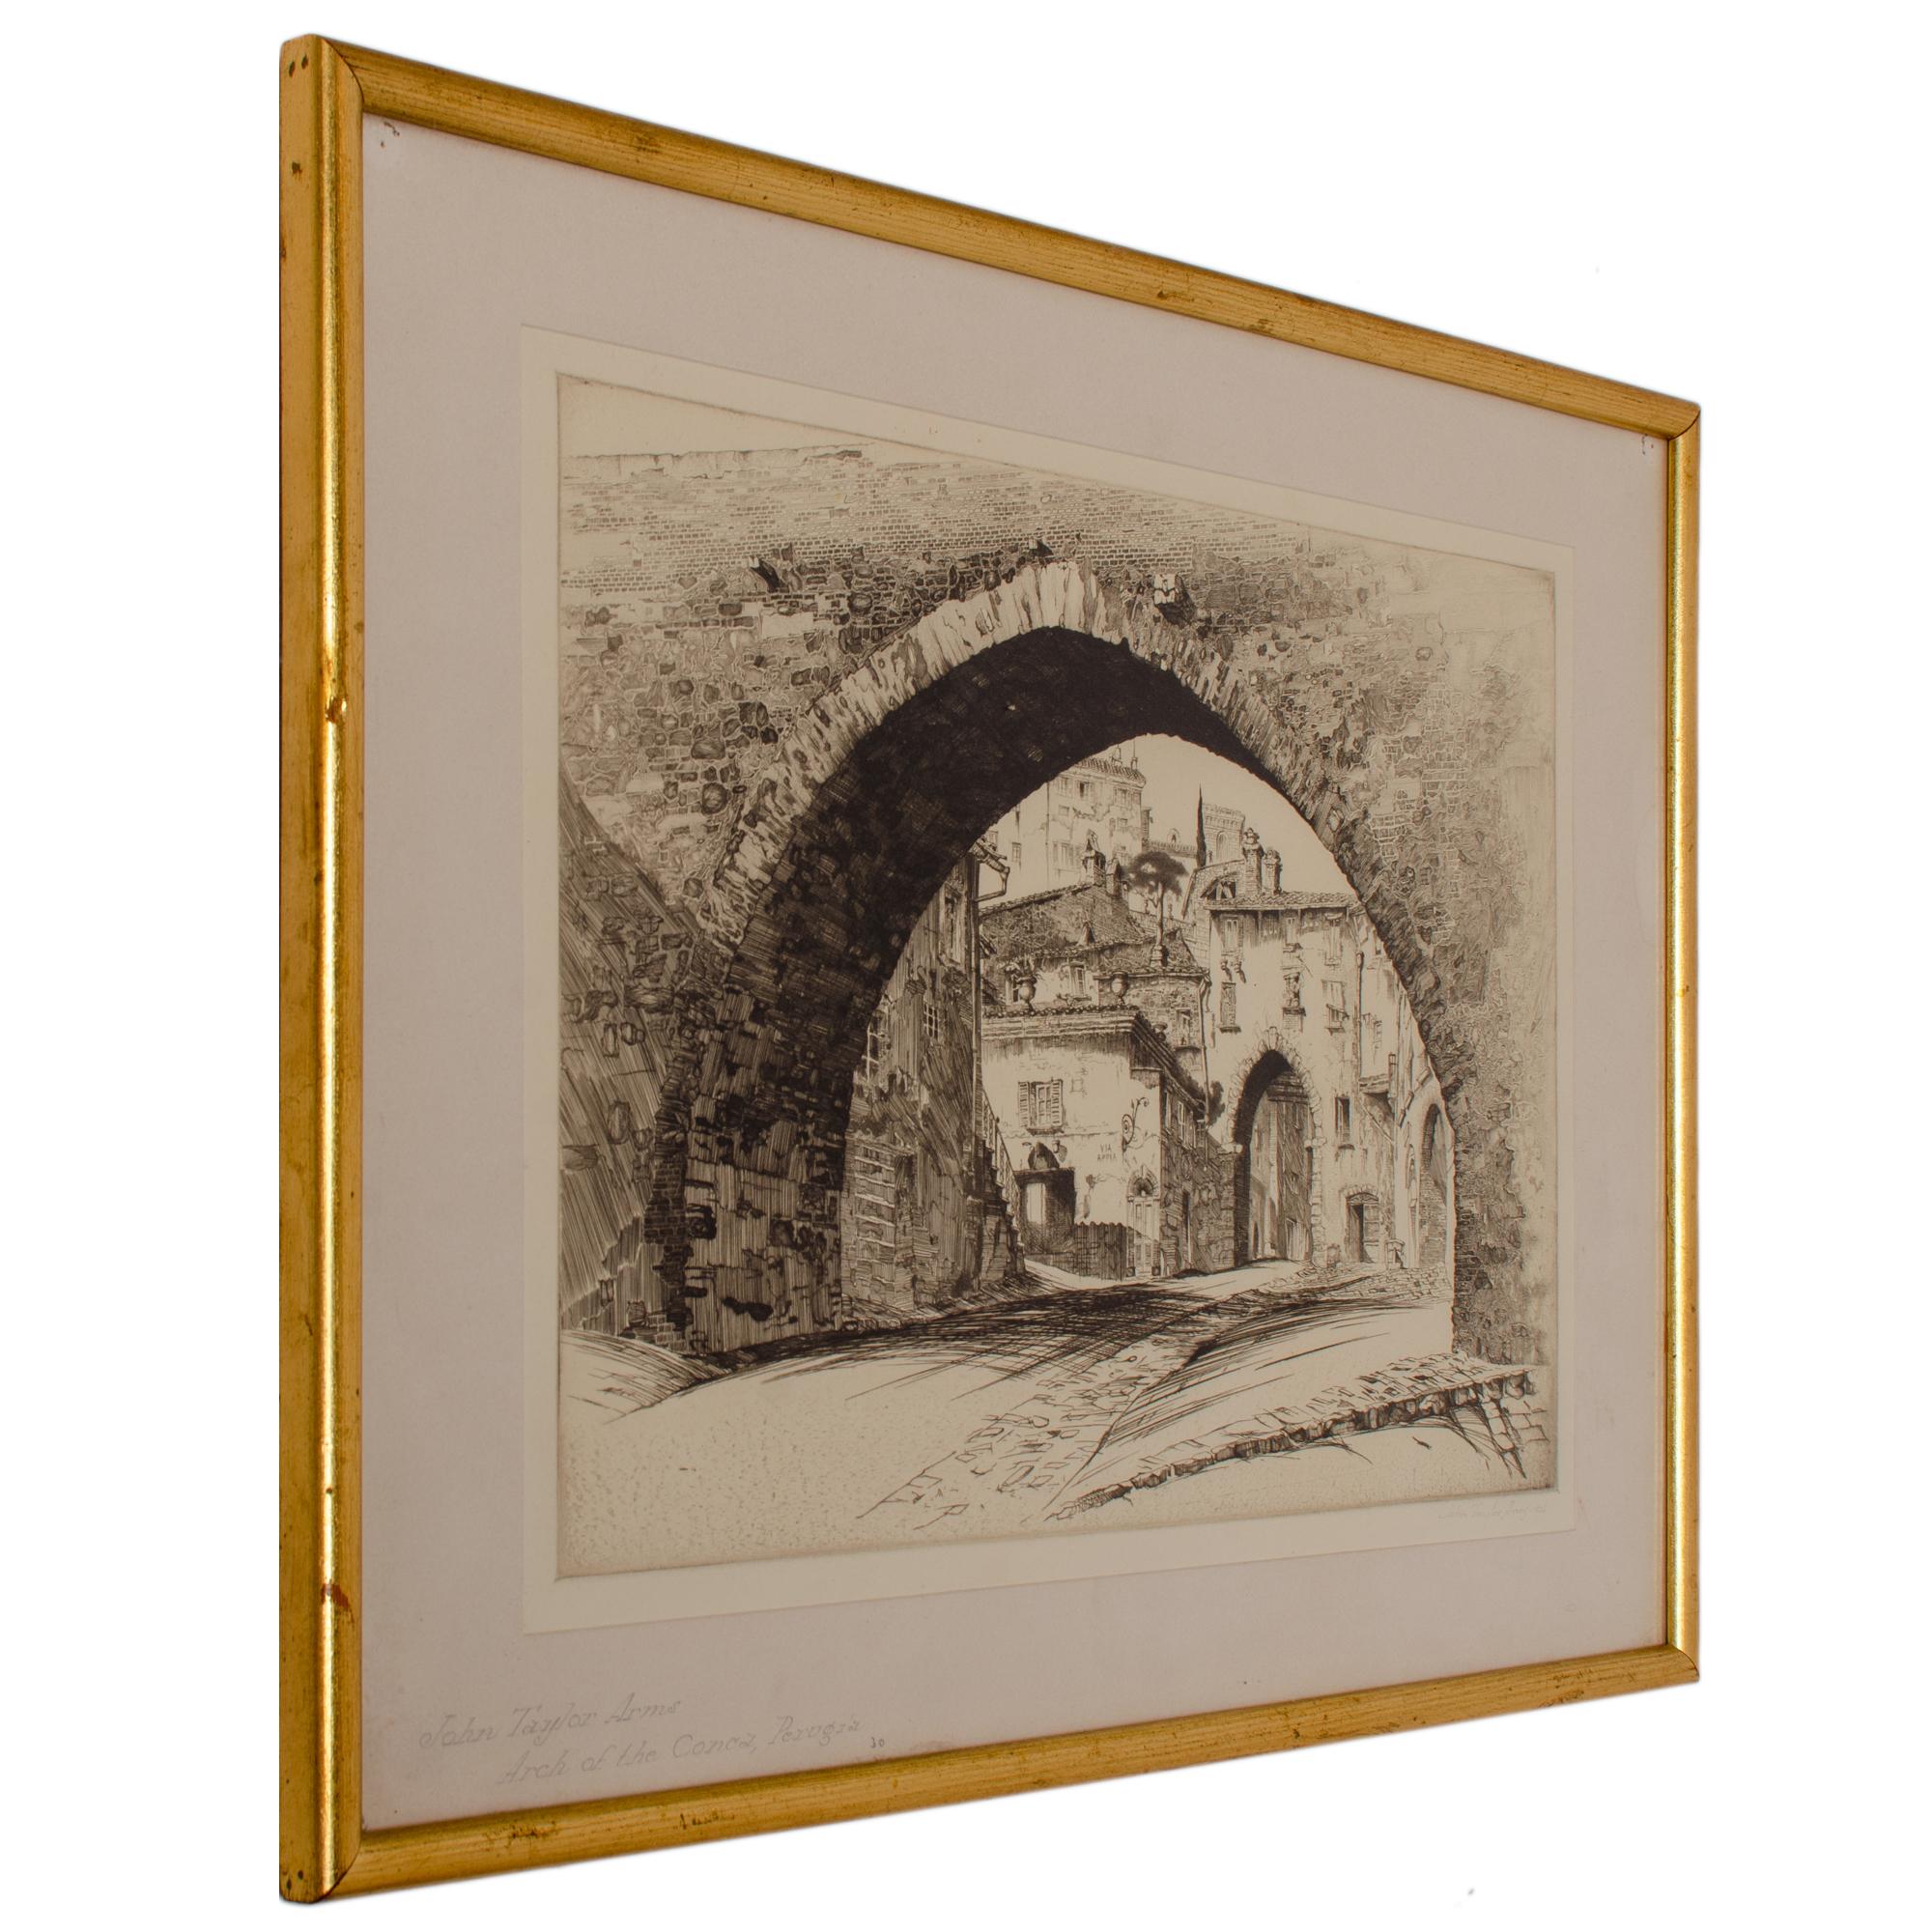 John Taylor Arms

(American, 1887-1953)

Arch of the Conca, Perugia 

etching, 1926

signed, dated lower right: John Taylor Arms, 1926

sight: 15 ¼ by 11 inches

frame: 20 by 15 inches

John Taylor Arms was born in Washington D.C., he studied